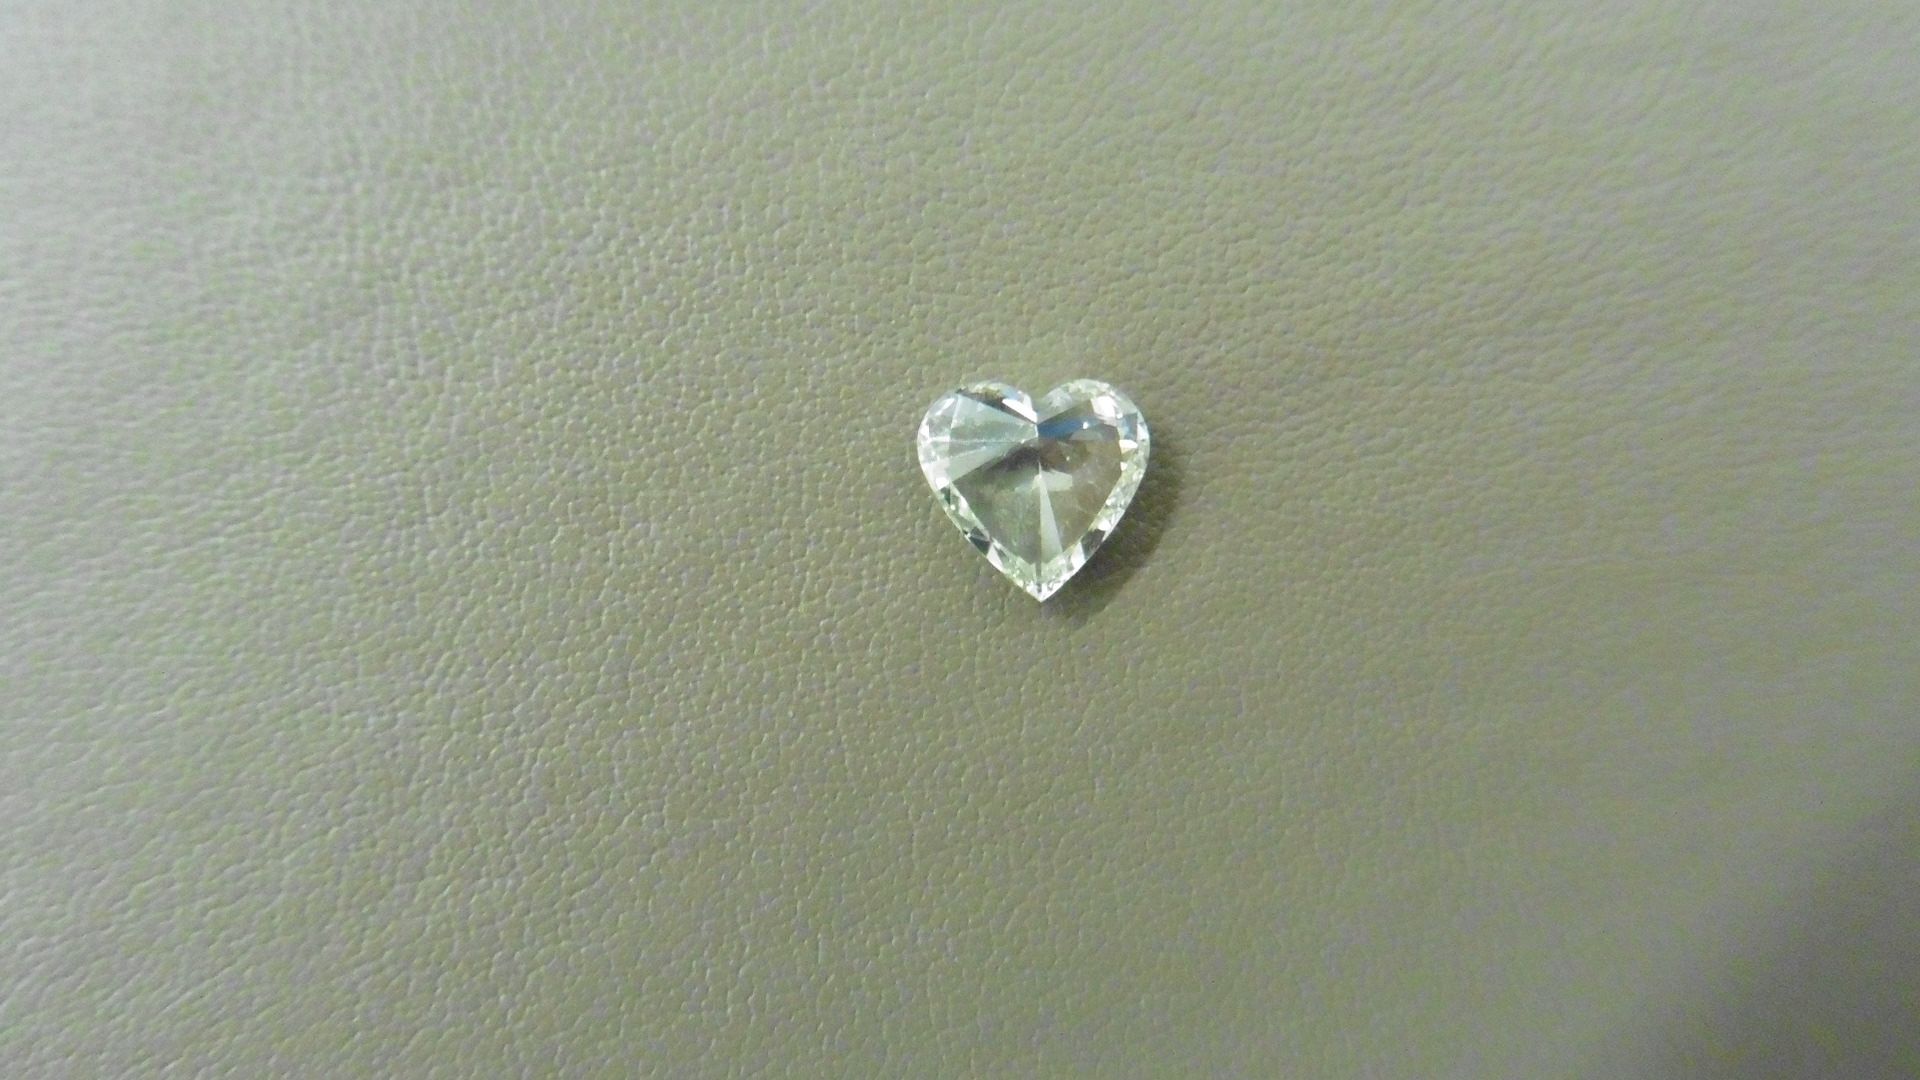 0.91ct heart shaped diamond, loose stone.J colour and Si clarity. No certification but can be done - Bild 3 aus 6